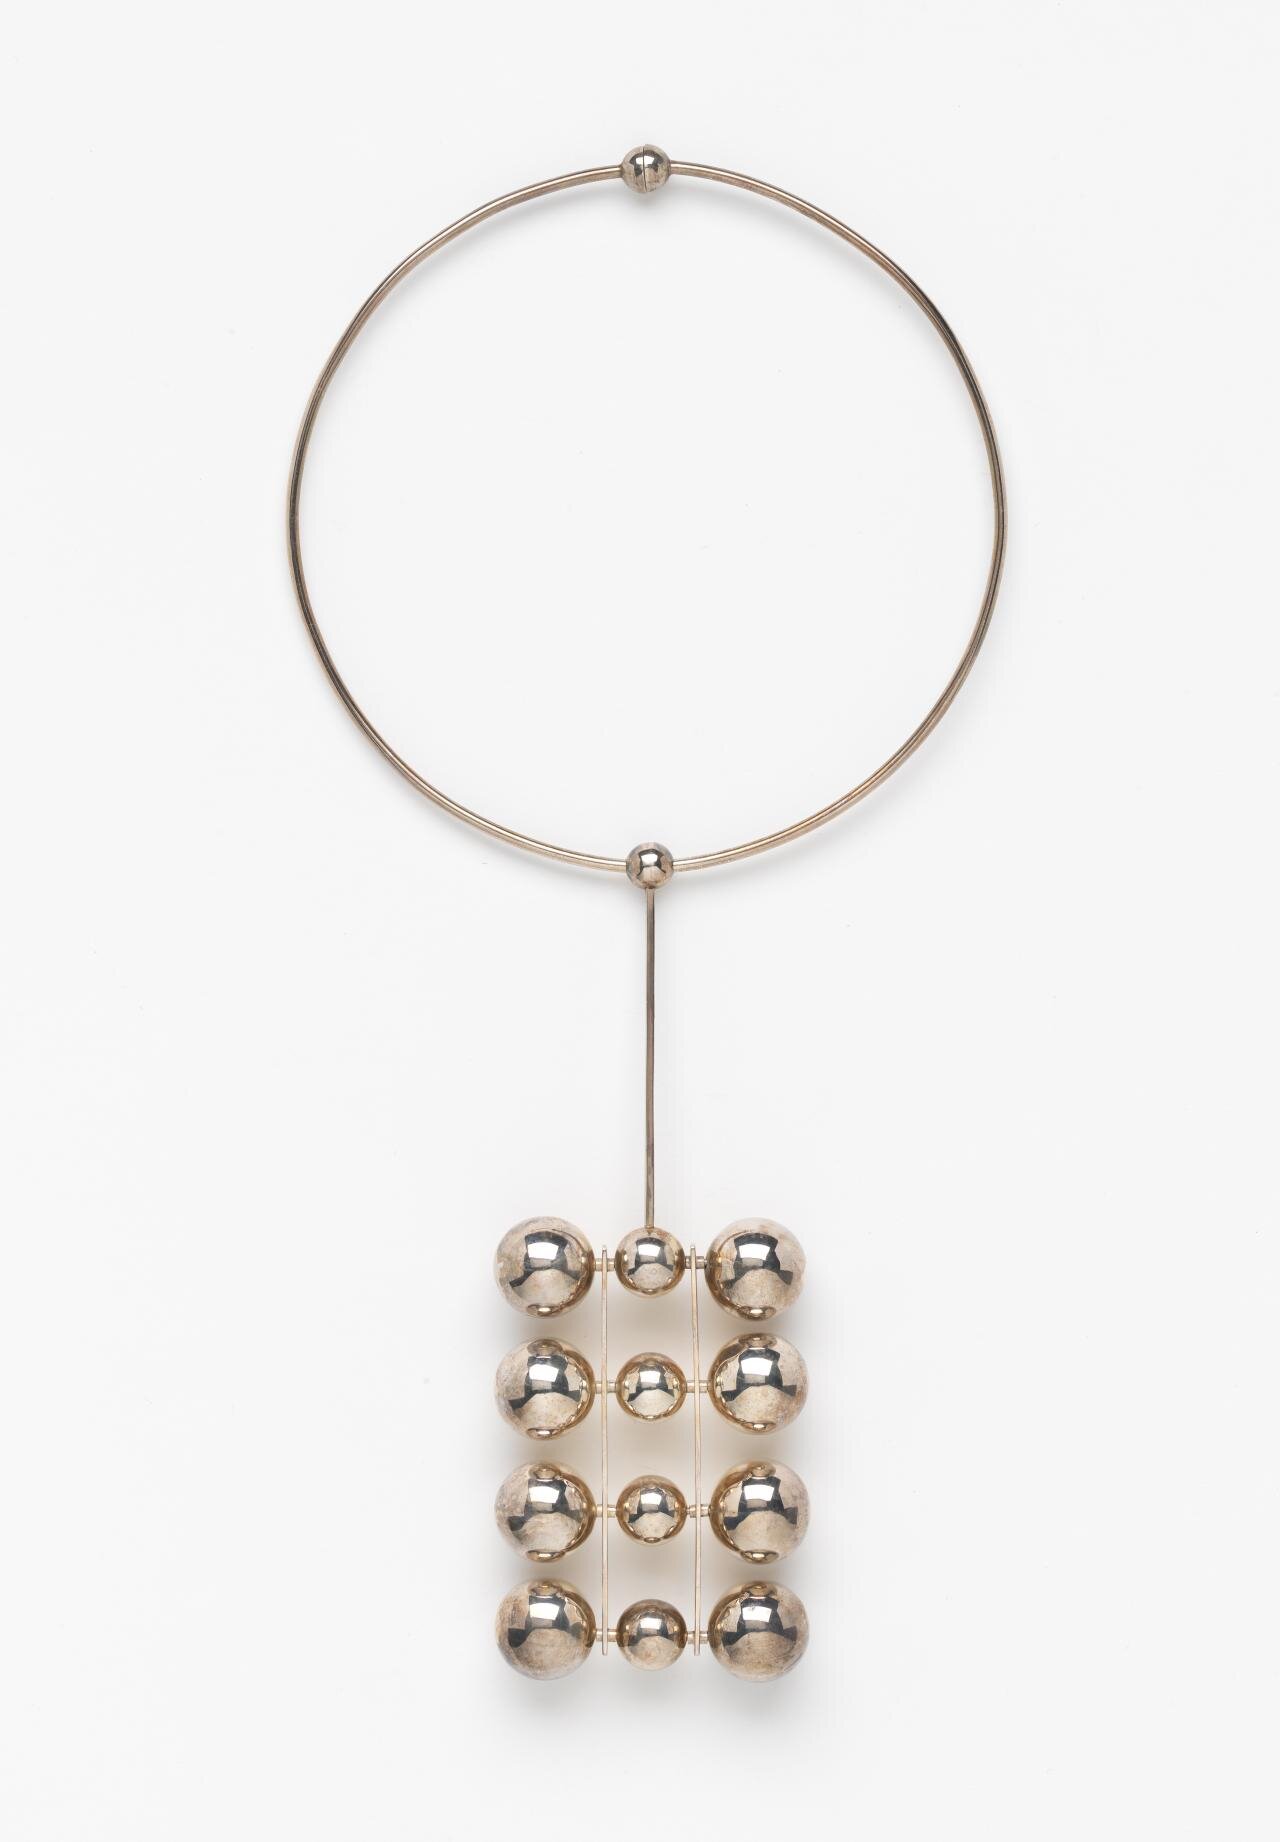 Pendant Form | National Gallery of Victoria, Melbourne